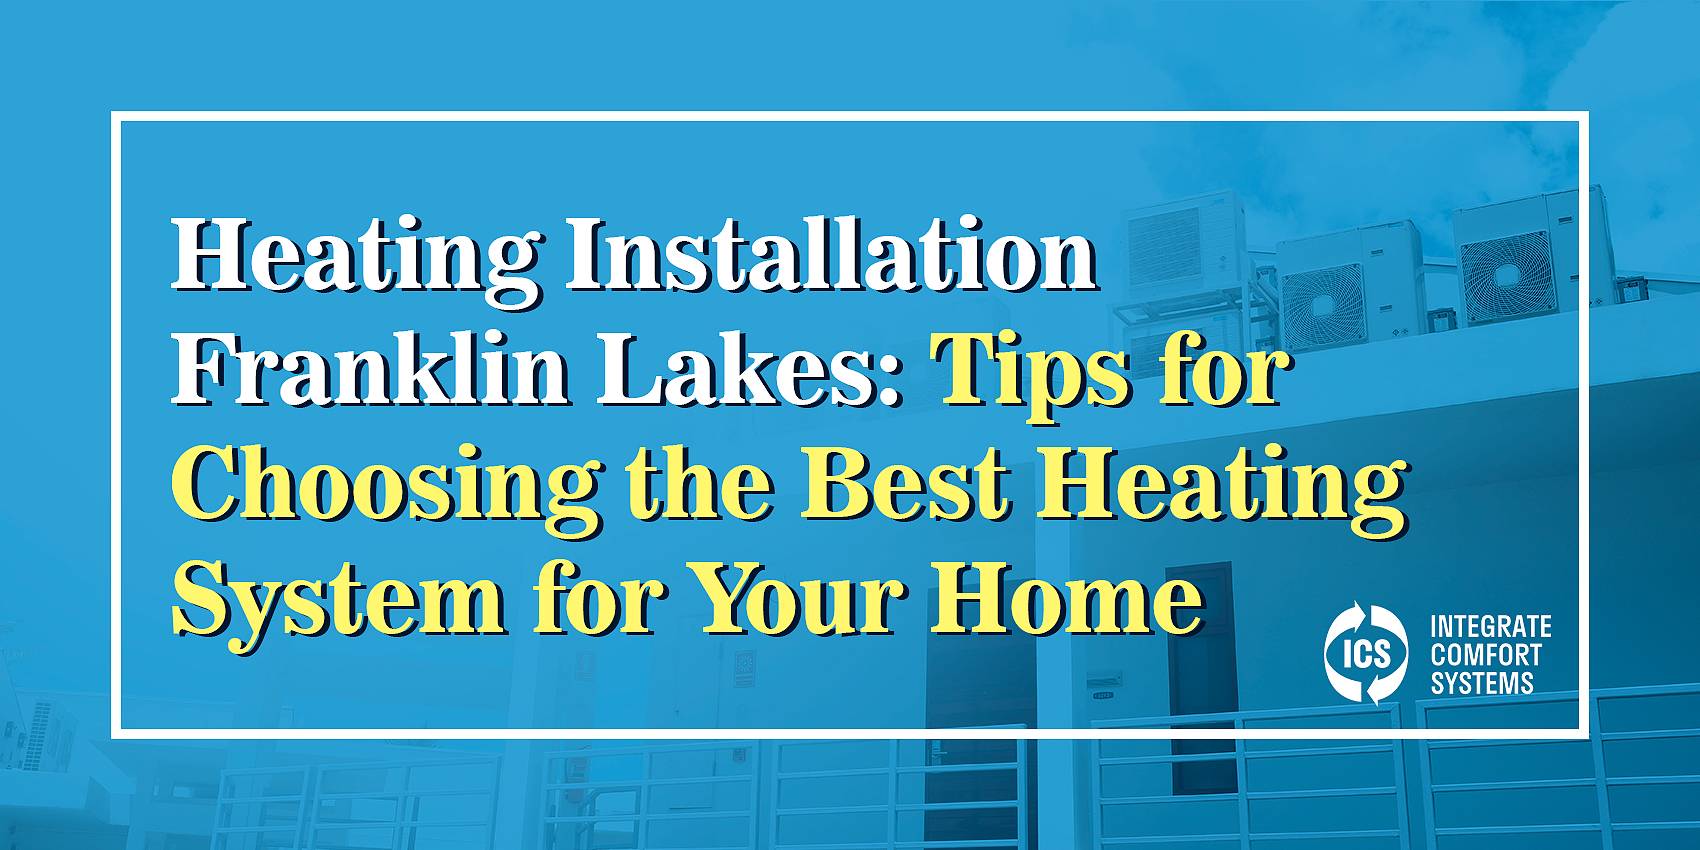 heating installation franklin lakes: tips for choosing the best heating system for your home